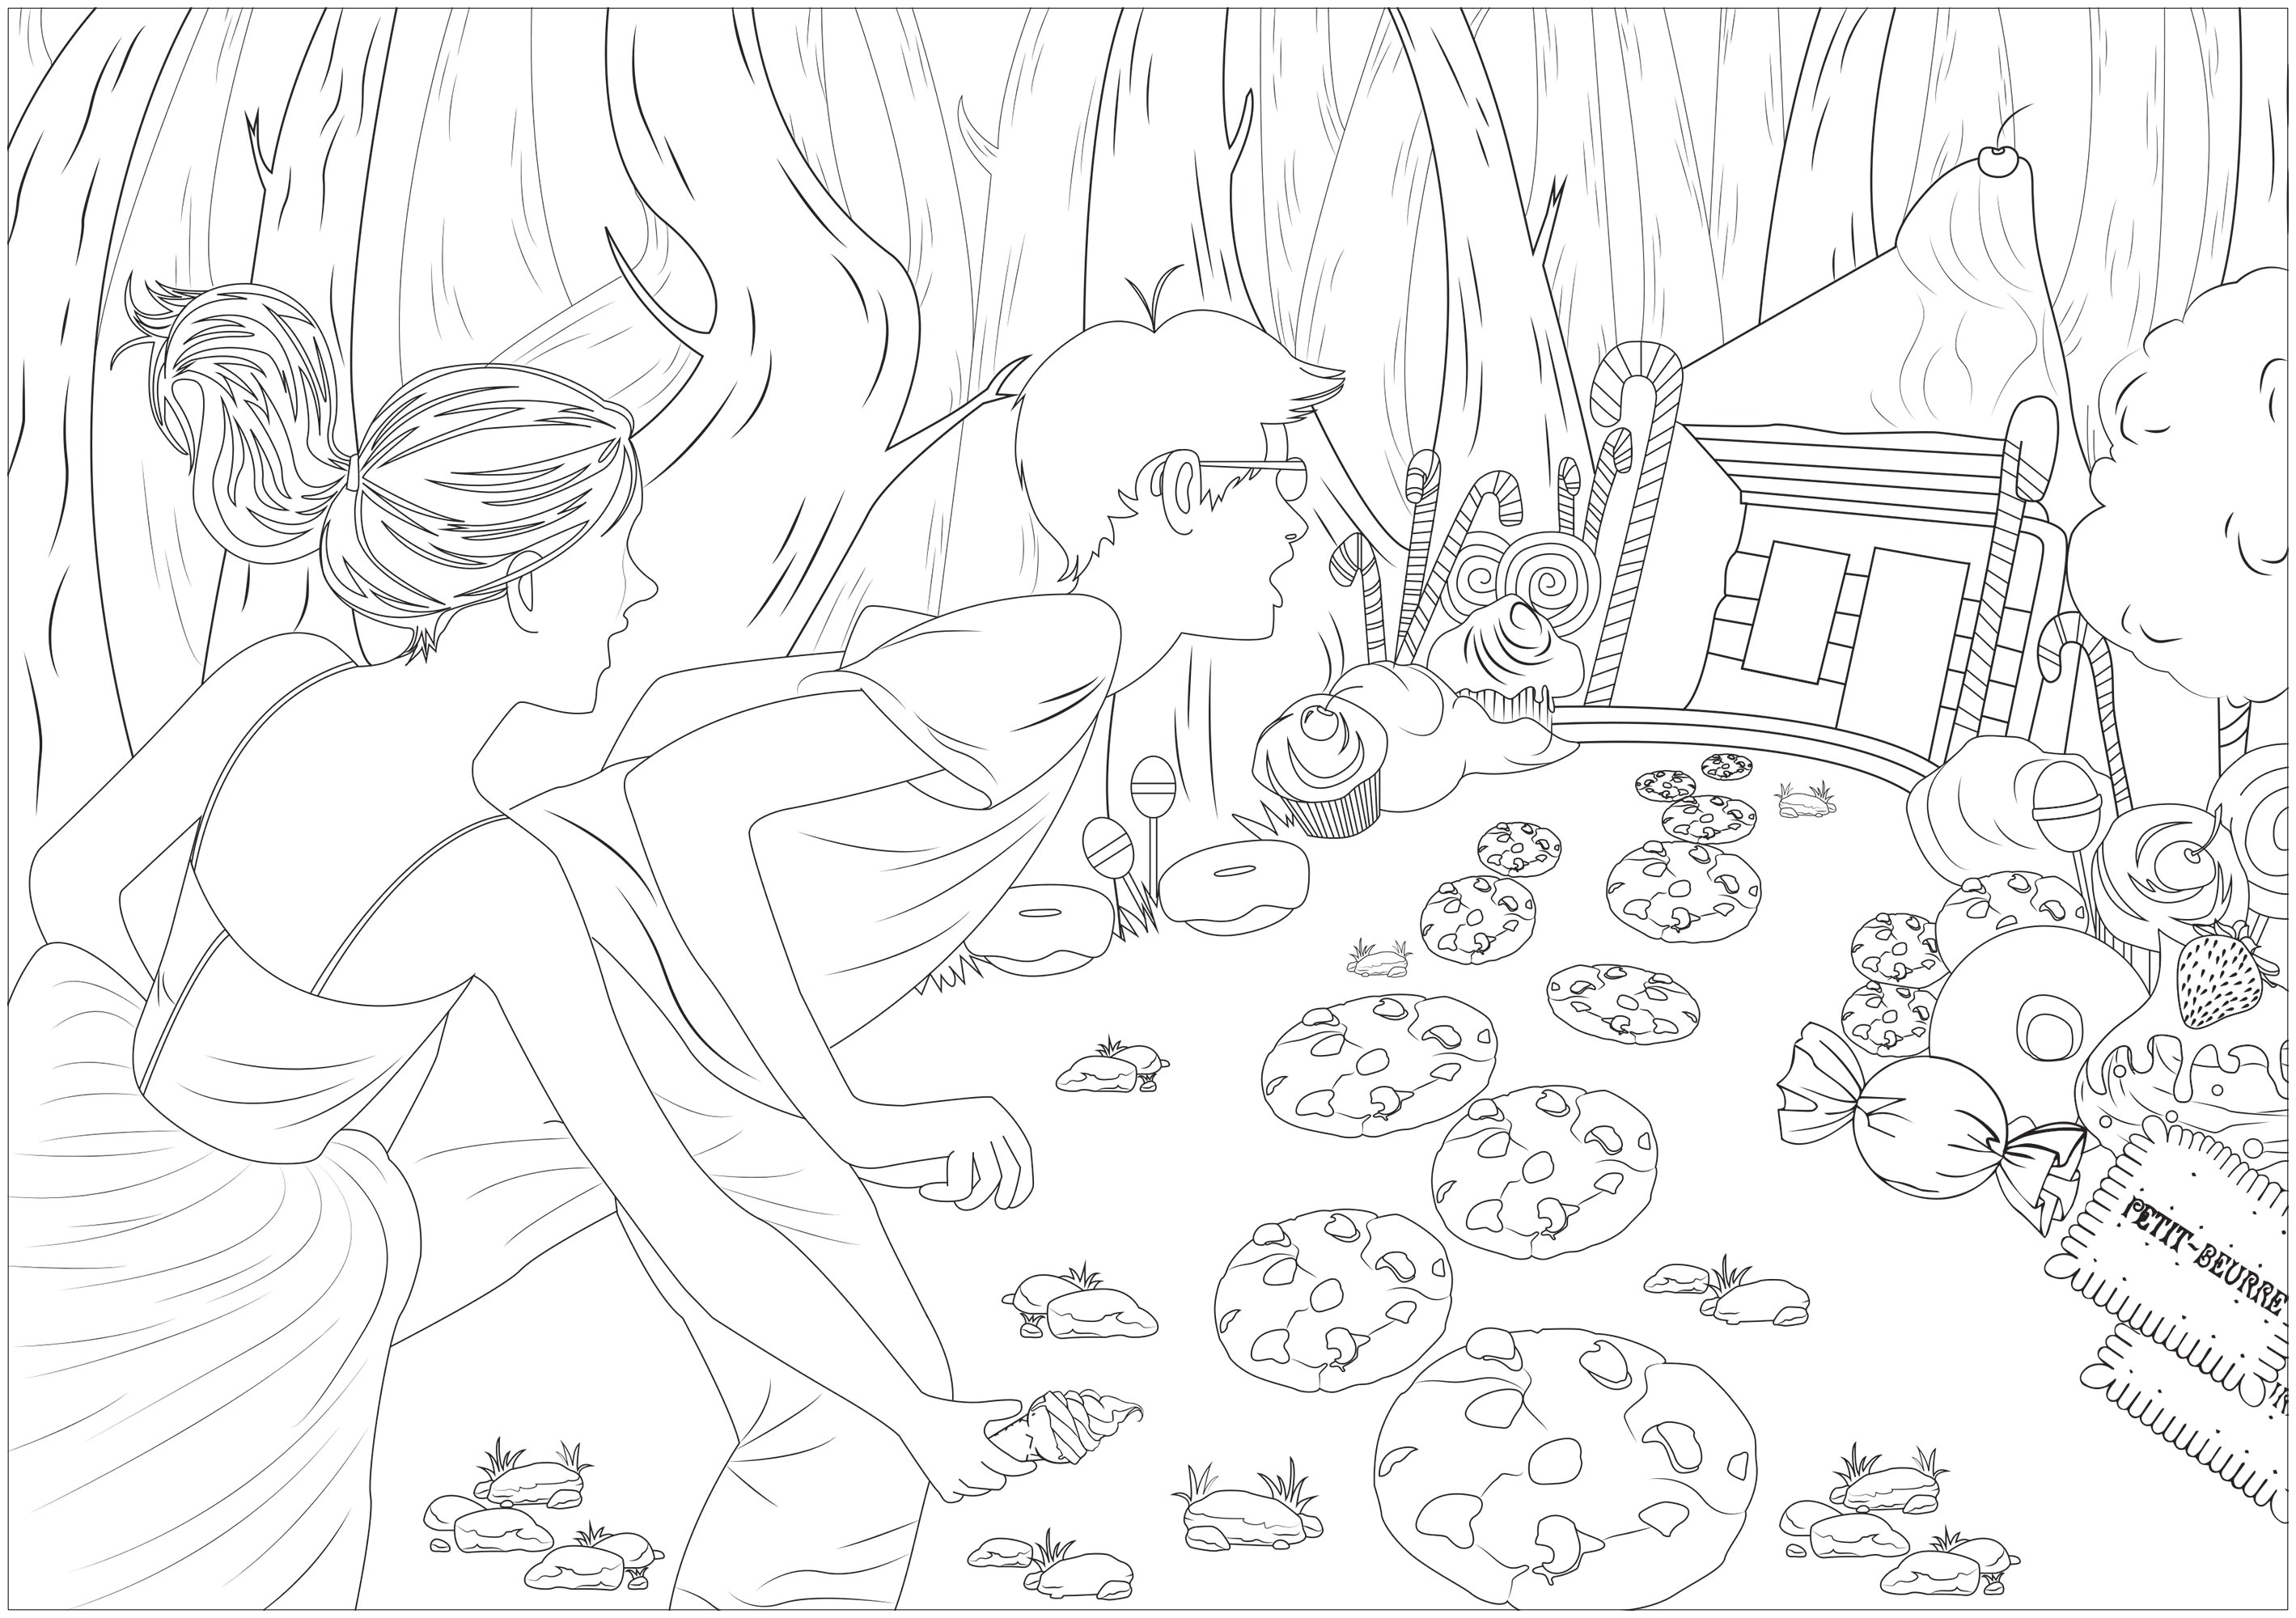 Illustration inspired by Hansel & Gretel fairy tale recorded by the Grimm brothers